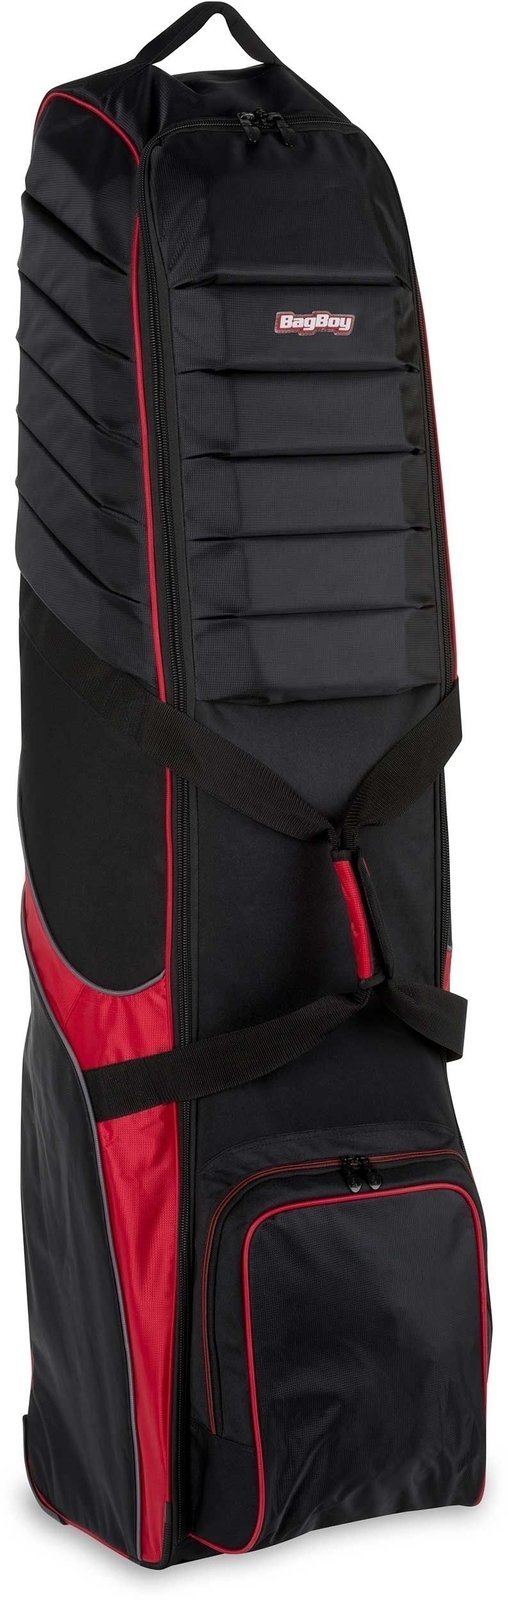 Travel Bag BagBoy T-750 Travel Cover Black/Red